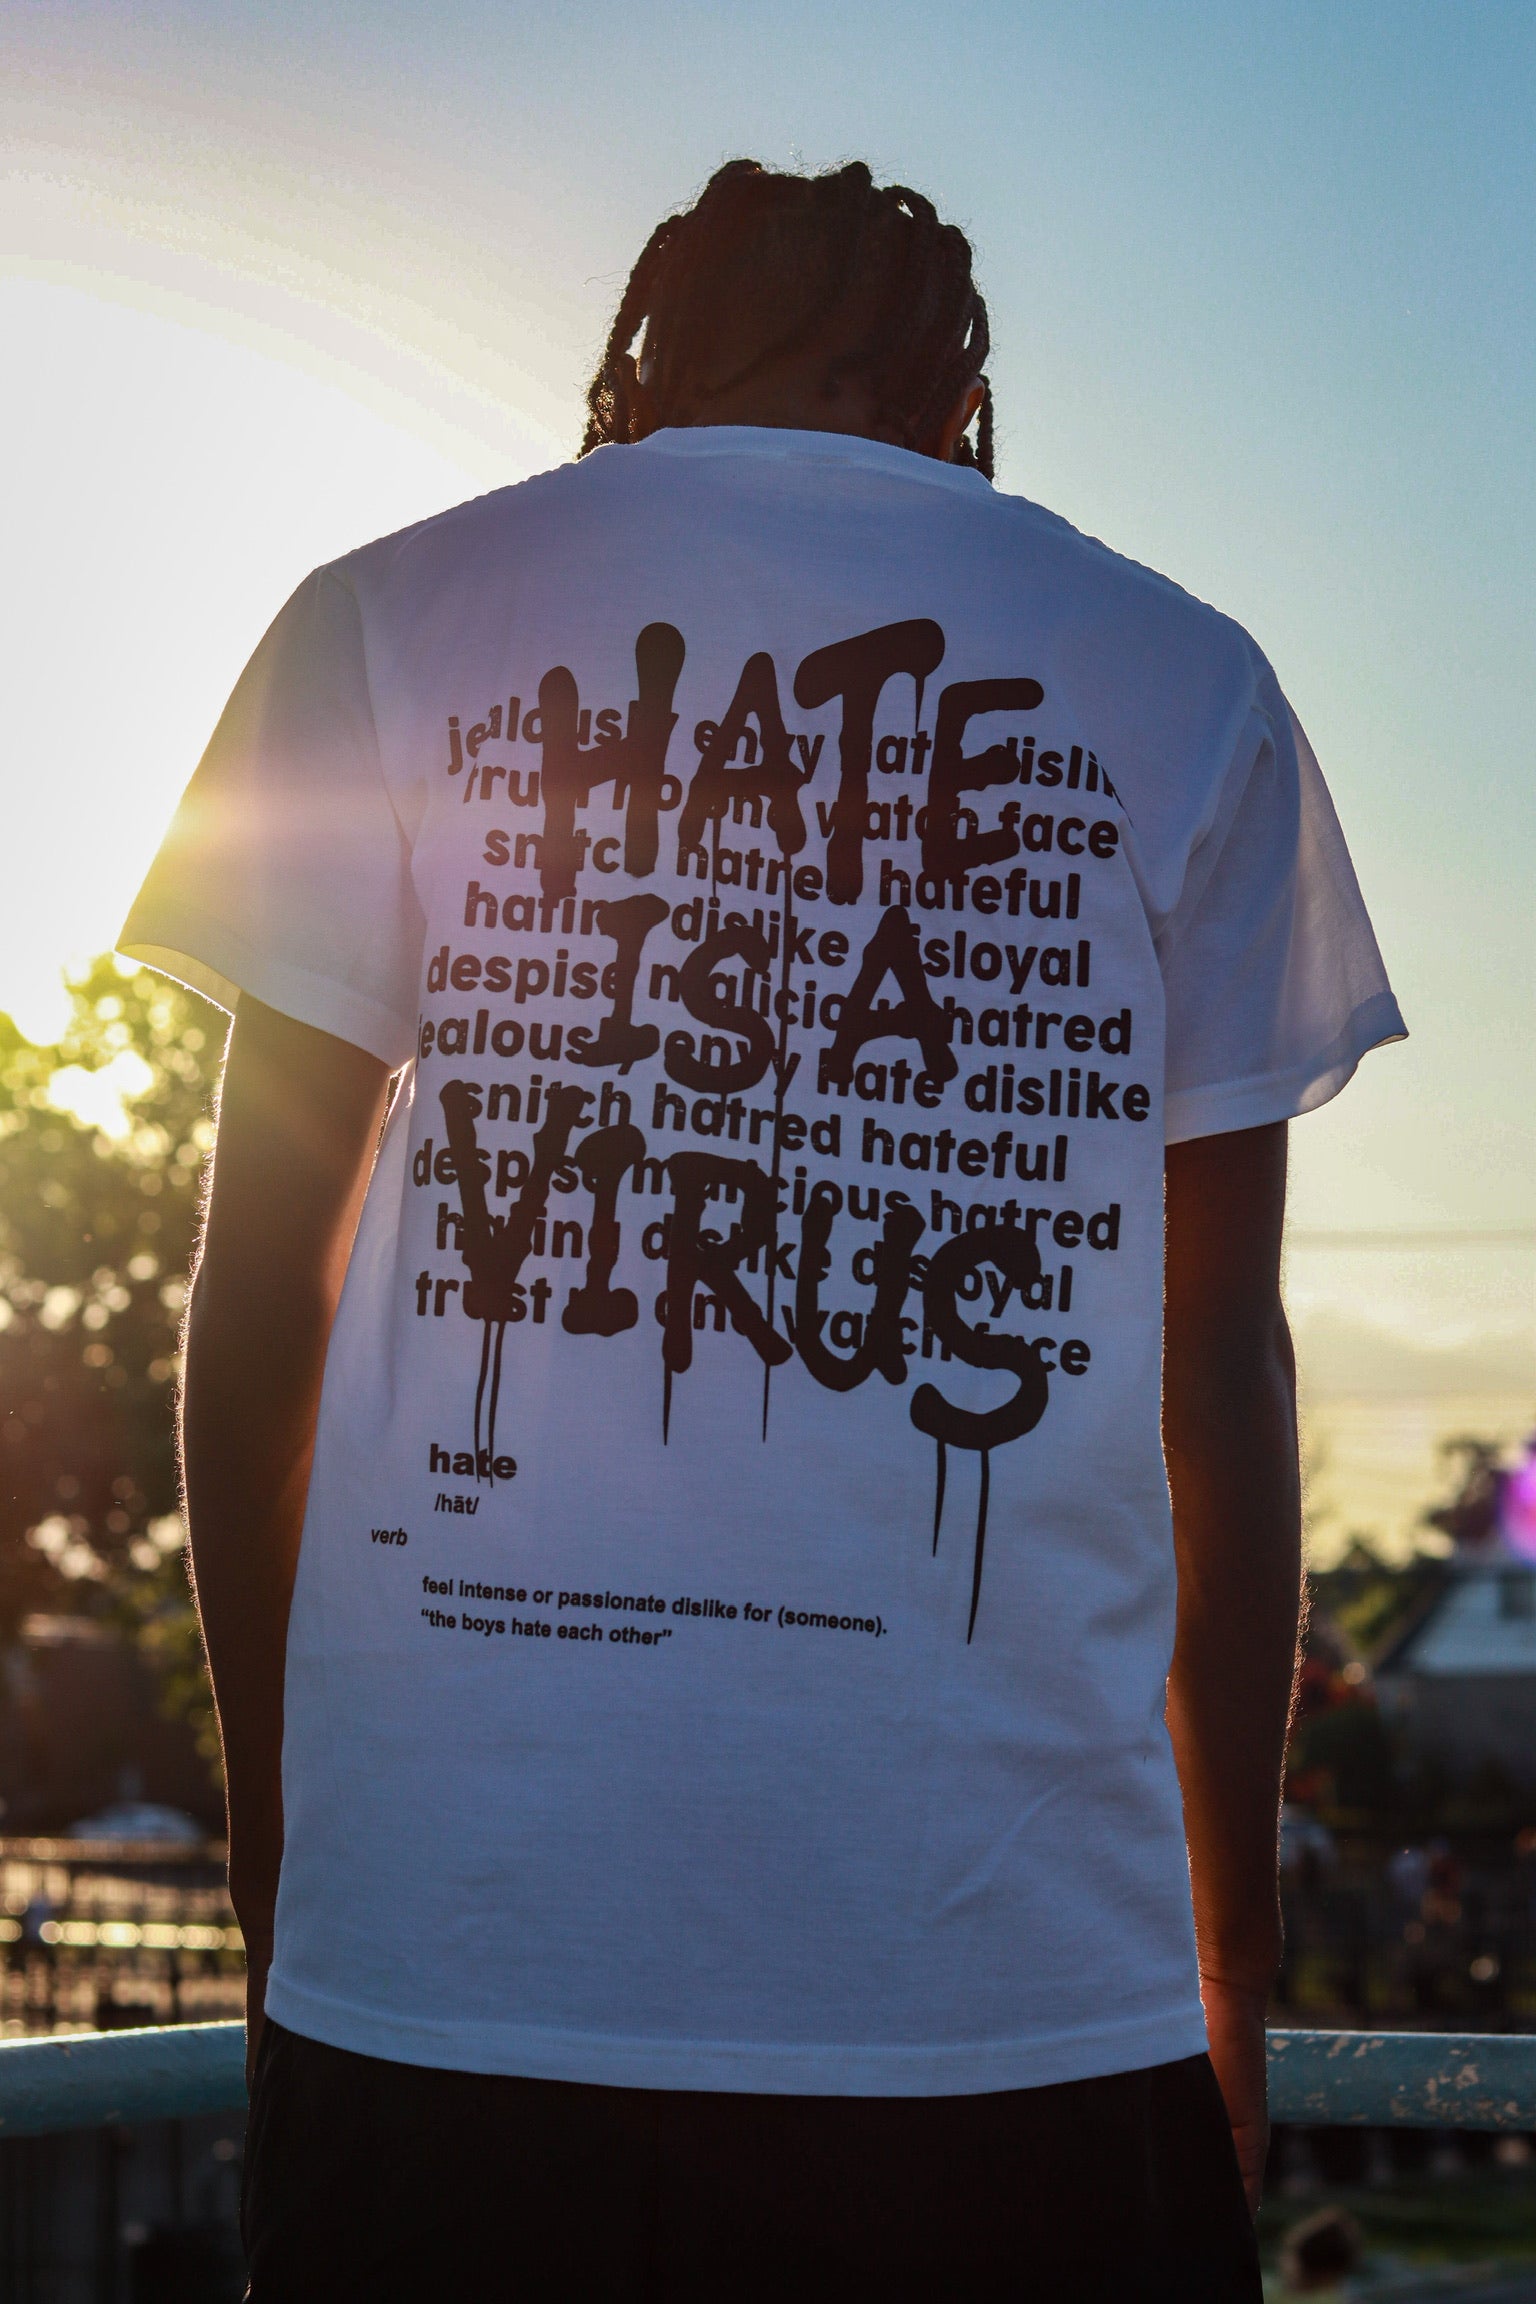 HATE IS A VIRUS White T-Shirt